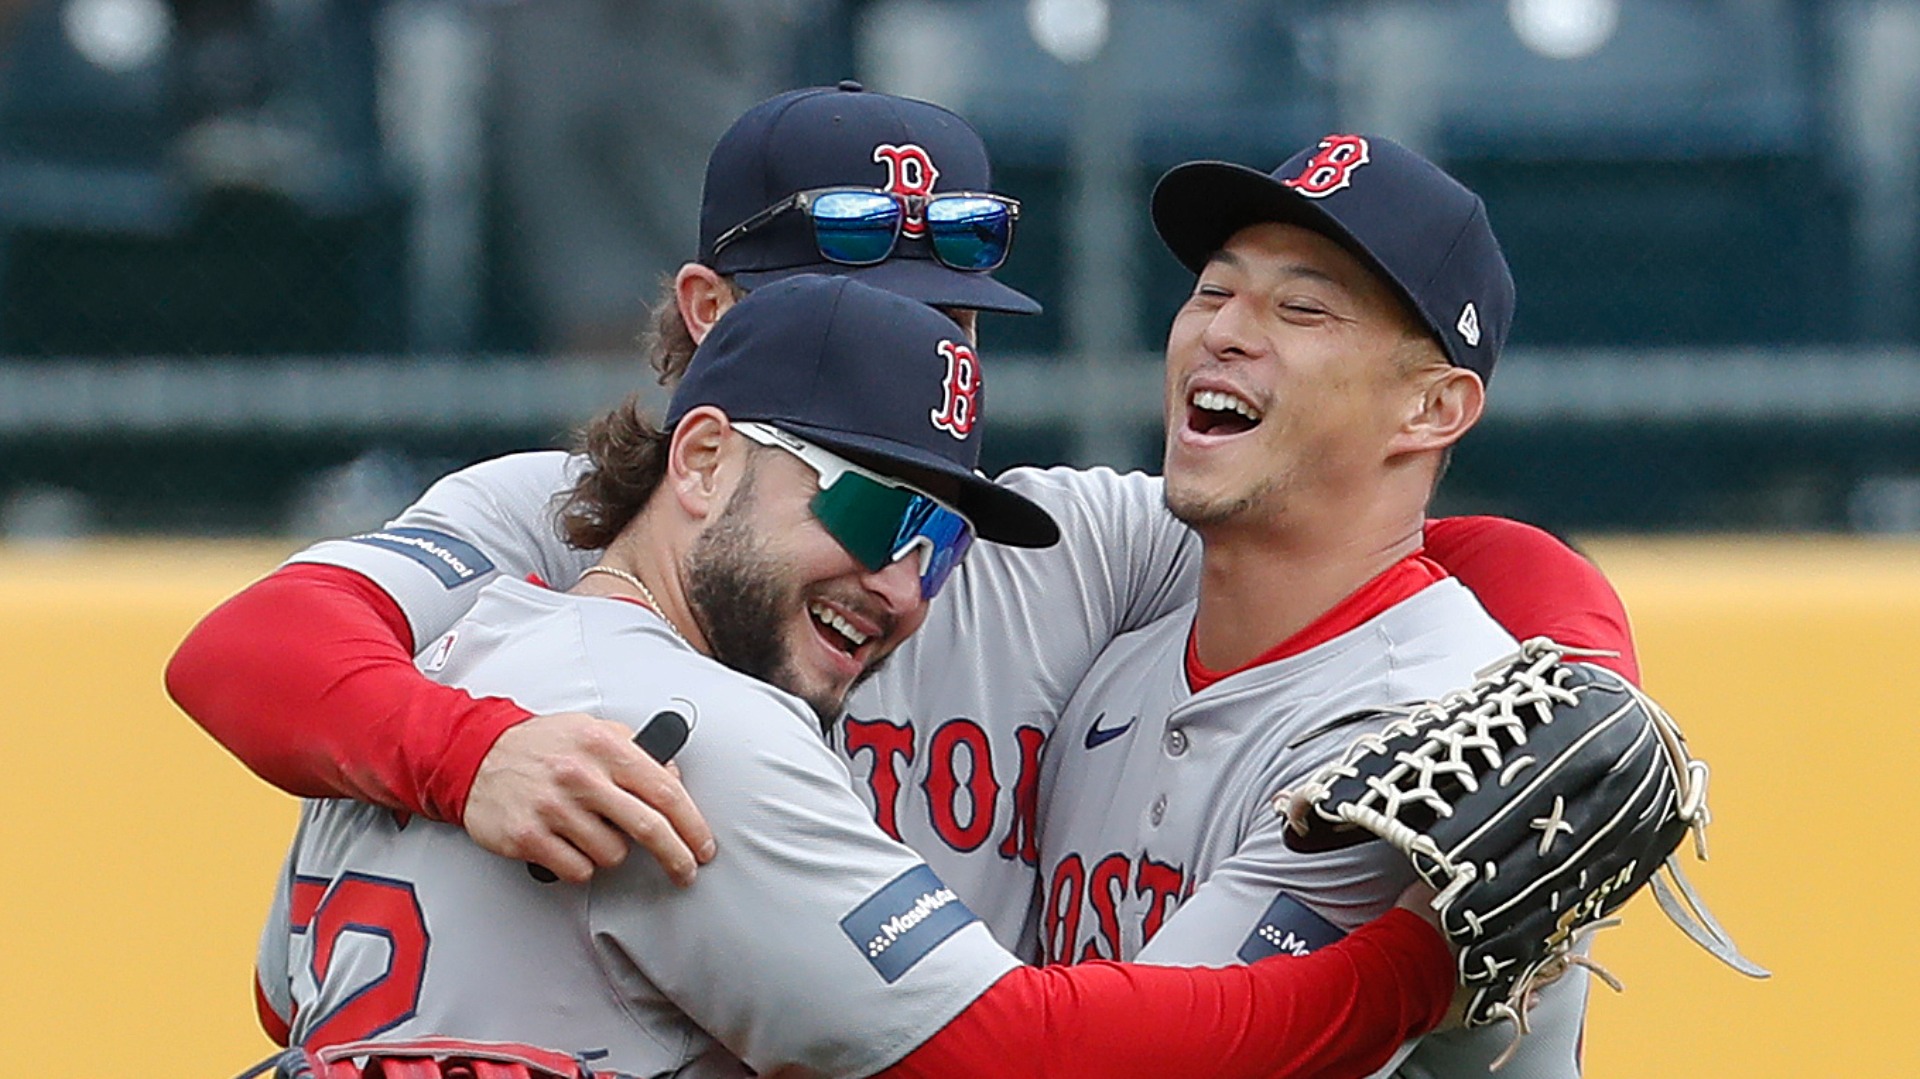 Red Sox Notes: ‘Total Team Effort’ Leads Shorthanded Squad To
Series Sweep